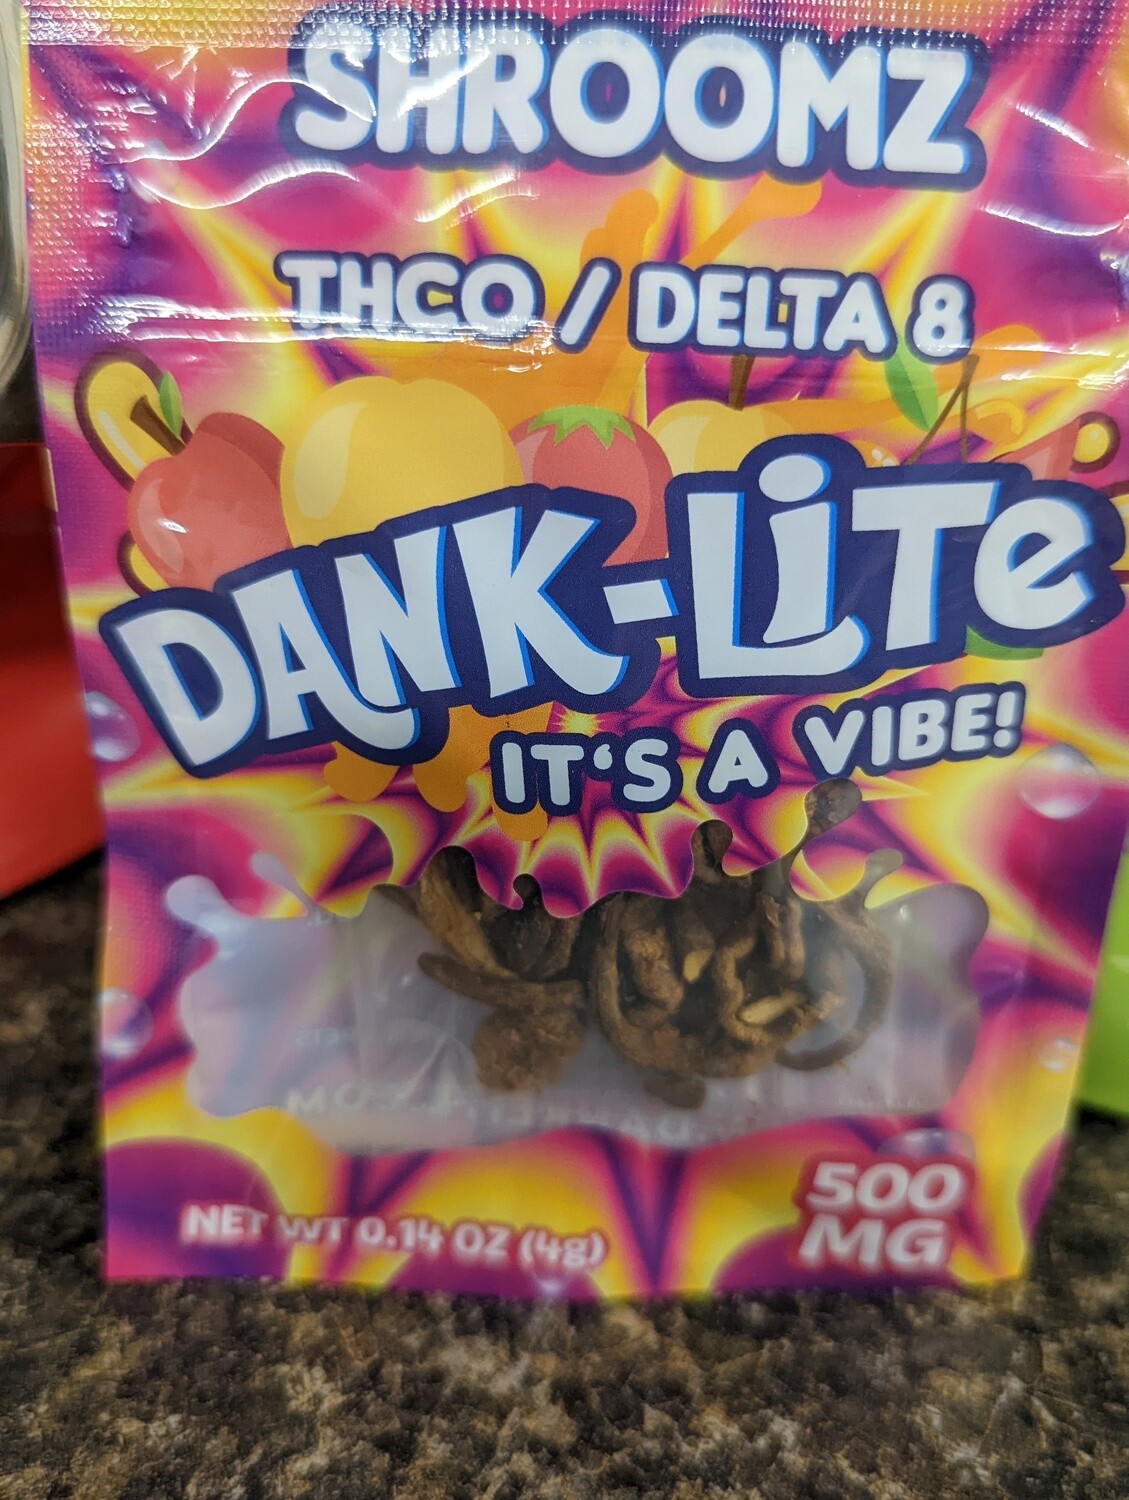 Delta 8 THC and THC-O mushroom edible packs with 500mg